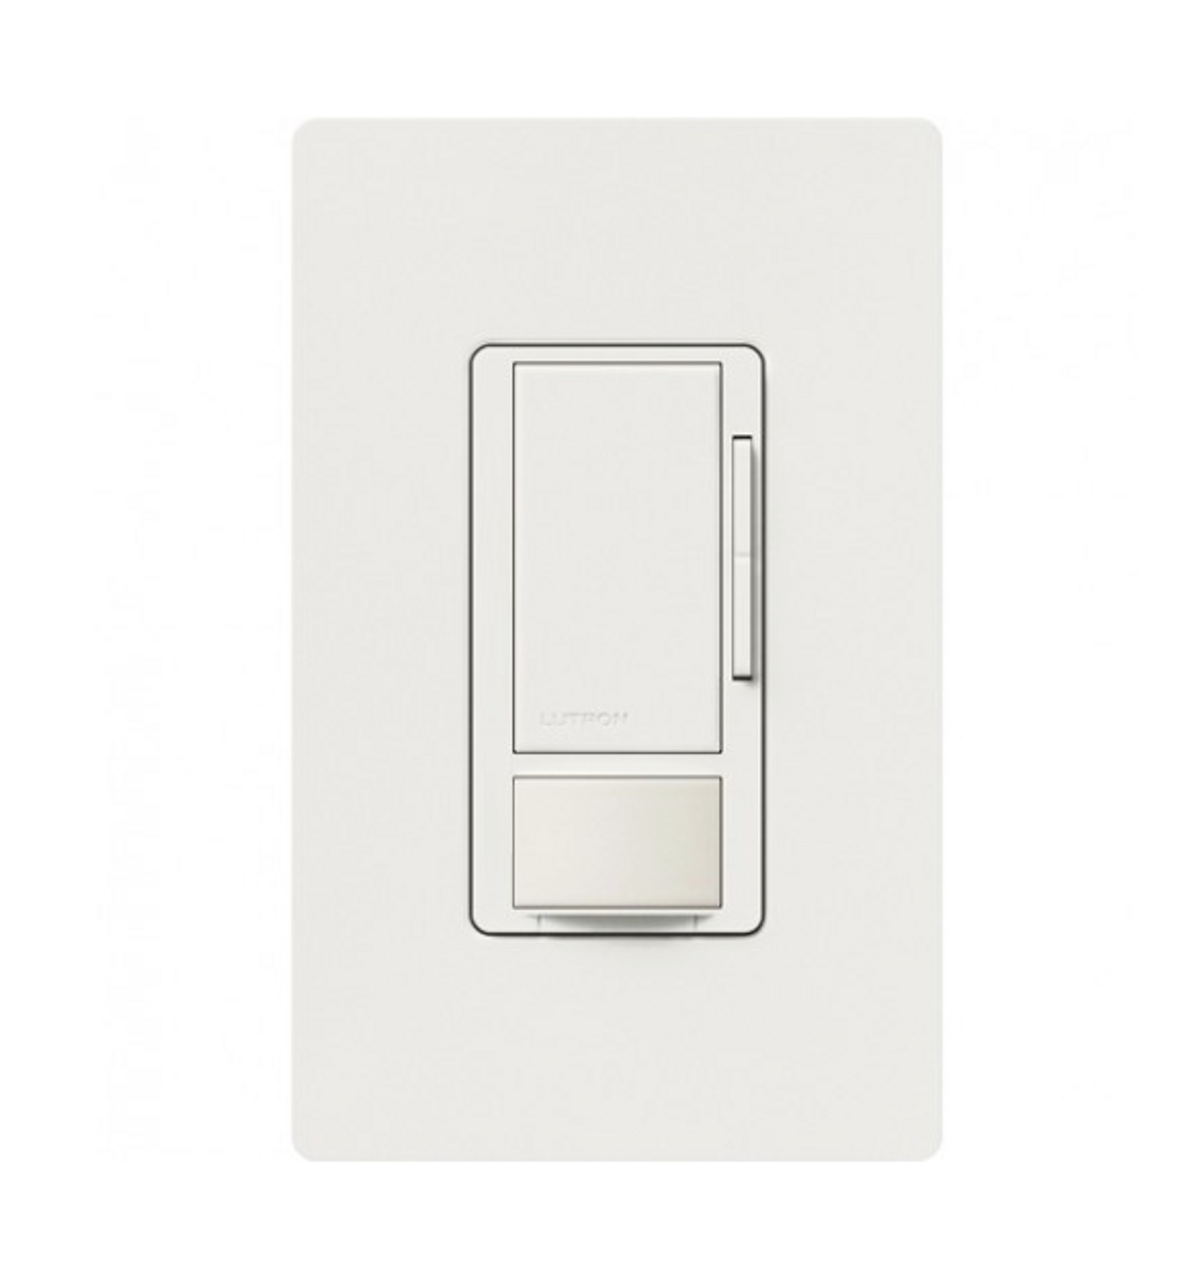 BIS Registration for Dimmers for Led Products – IS 60669-2-1: 2008